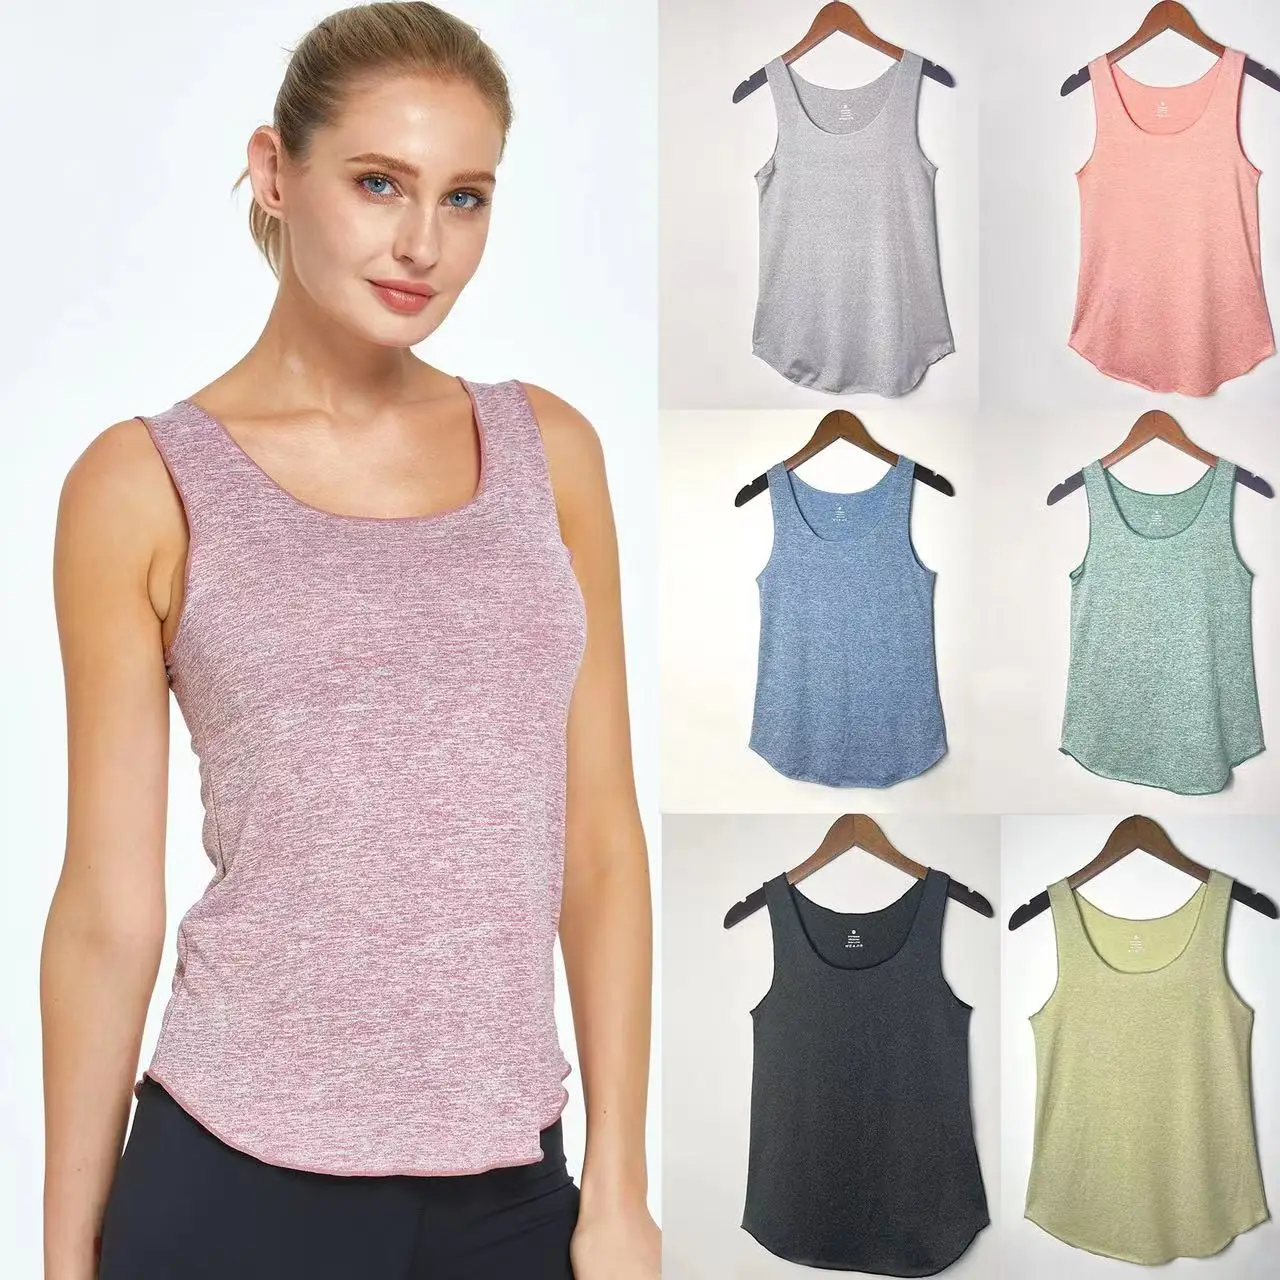 Sports Breathable Bottoming Shirt Women Running Fitness Quick Dry Clothes Sleeveless Loose Shirt Yoga Clothing Tops